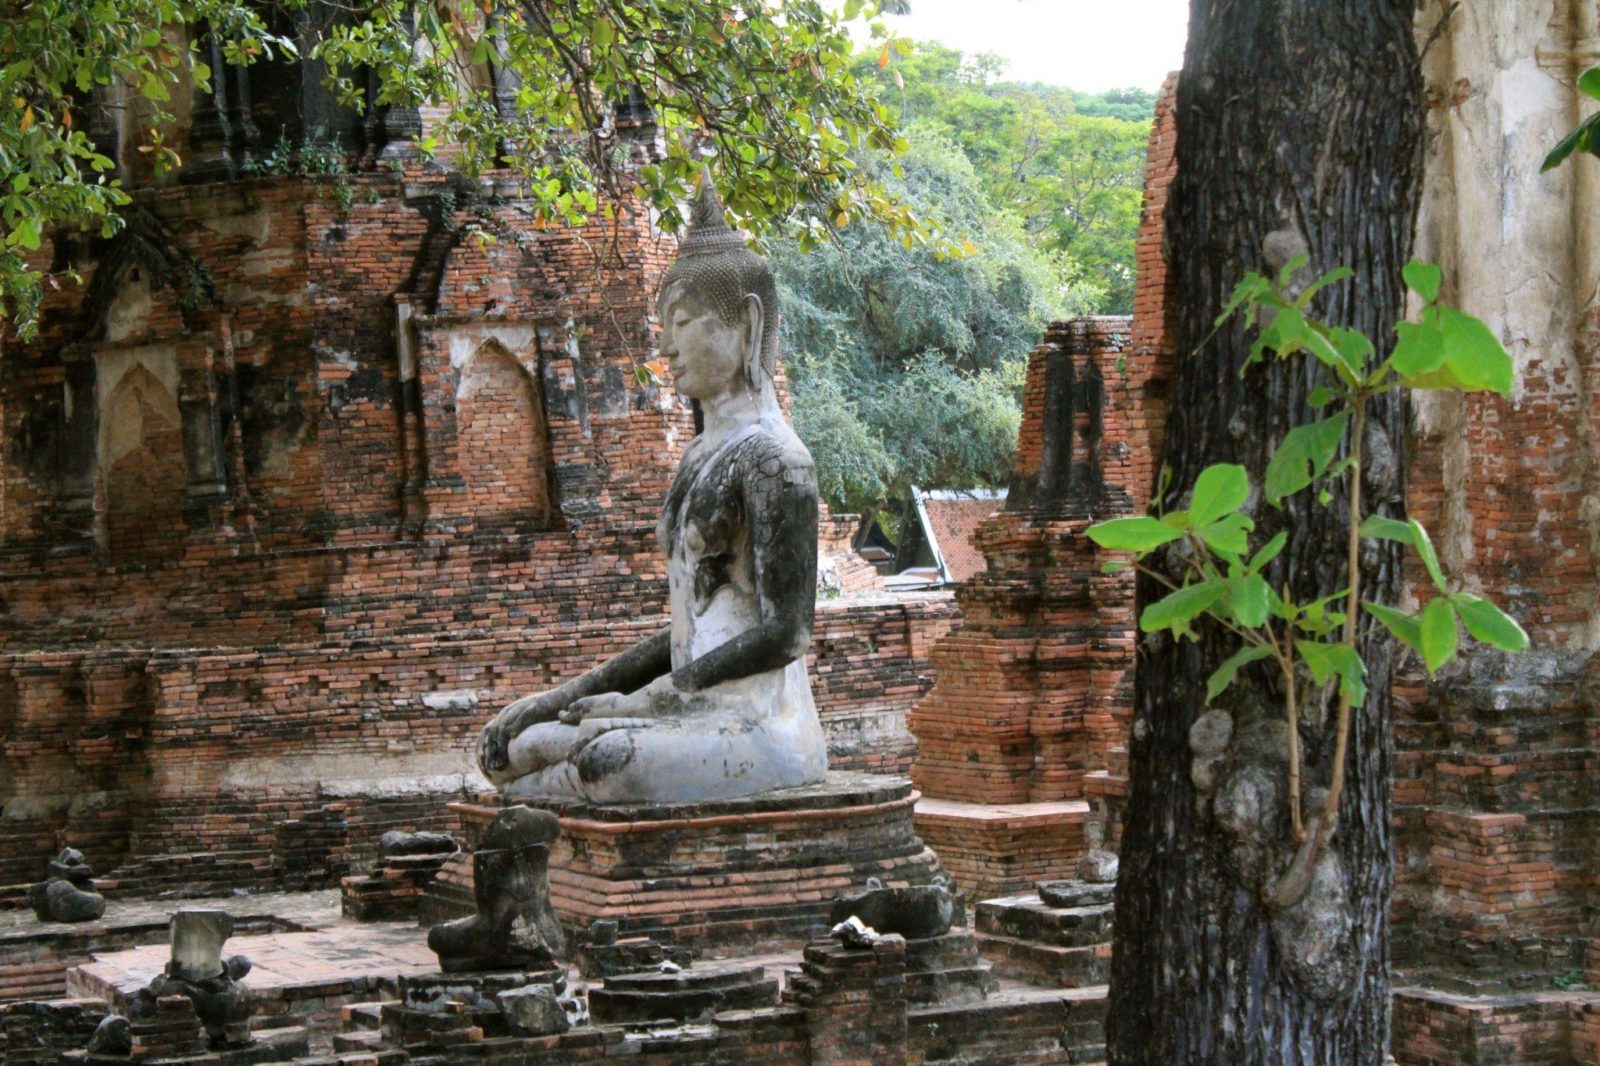 A statue of a buddha sitting in the middle of ruins, found in Ayutthaya, Thailand.